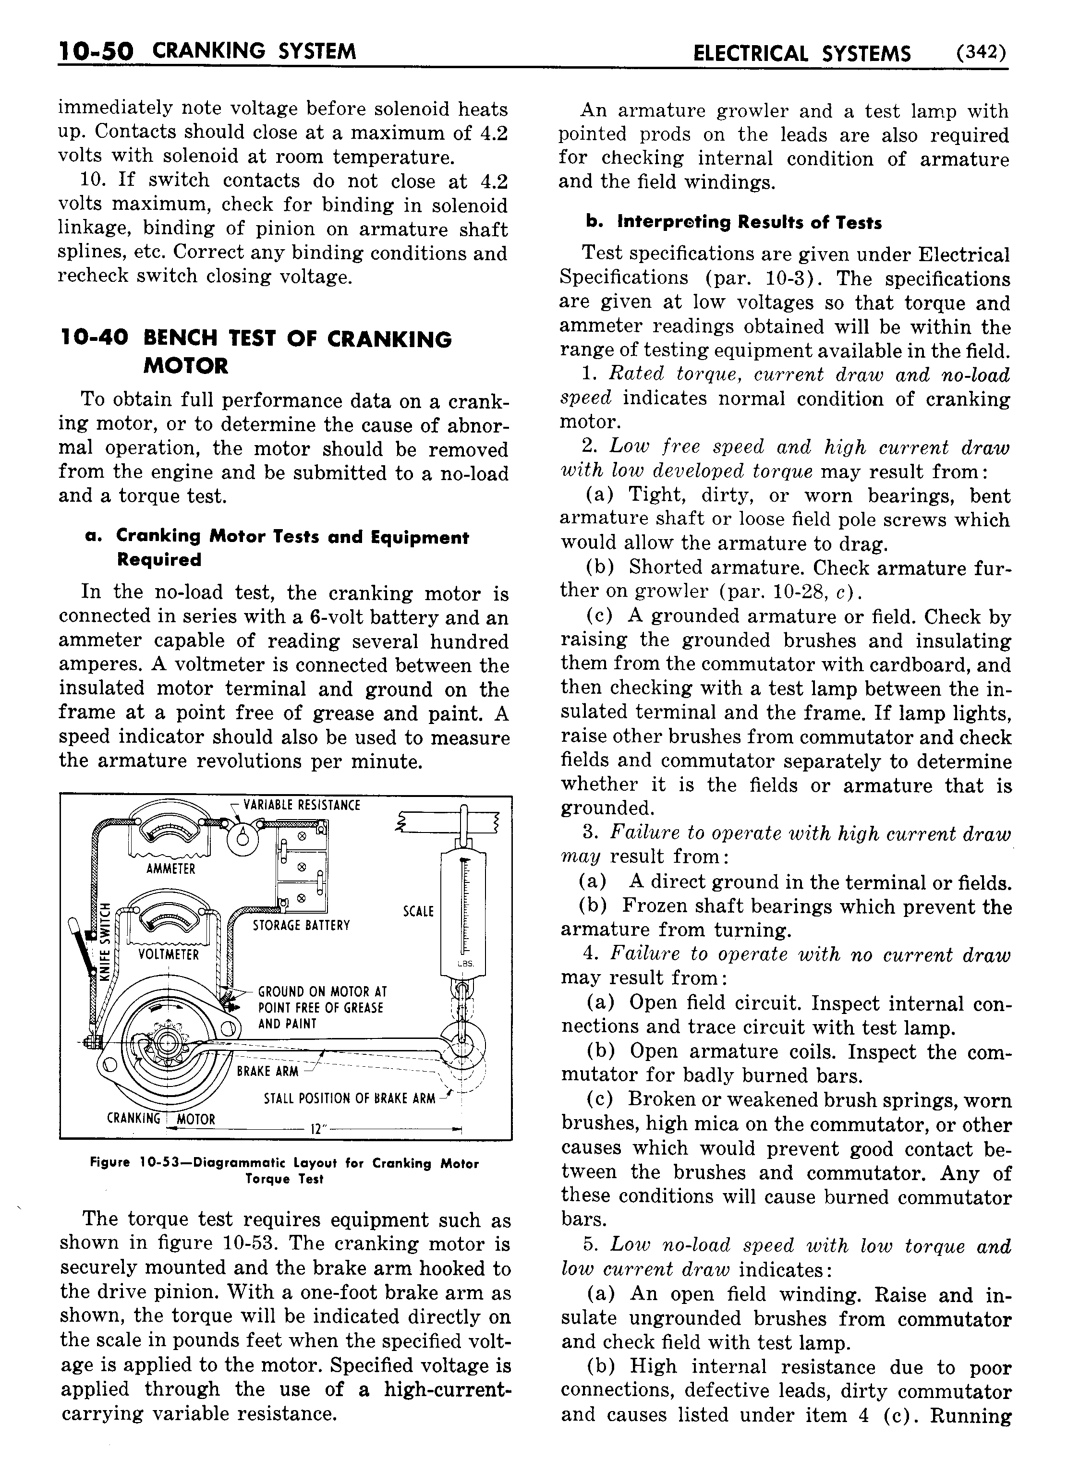 n_11 1951 Buick Shop Manual - Electrical Systems-050-050.jpg